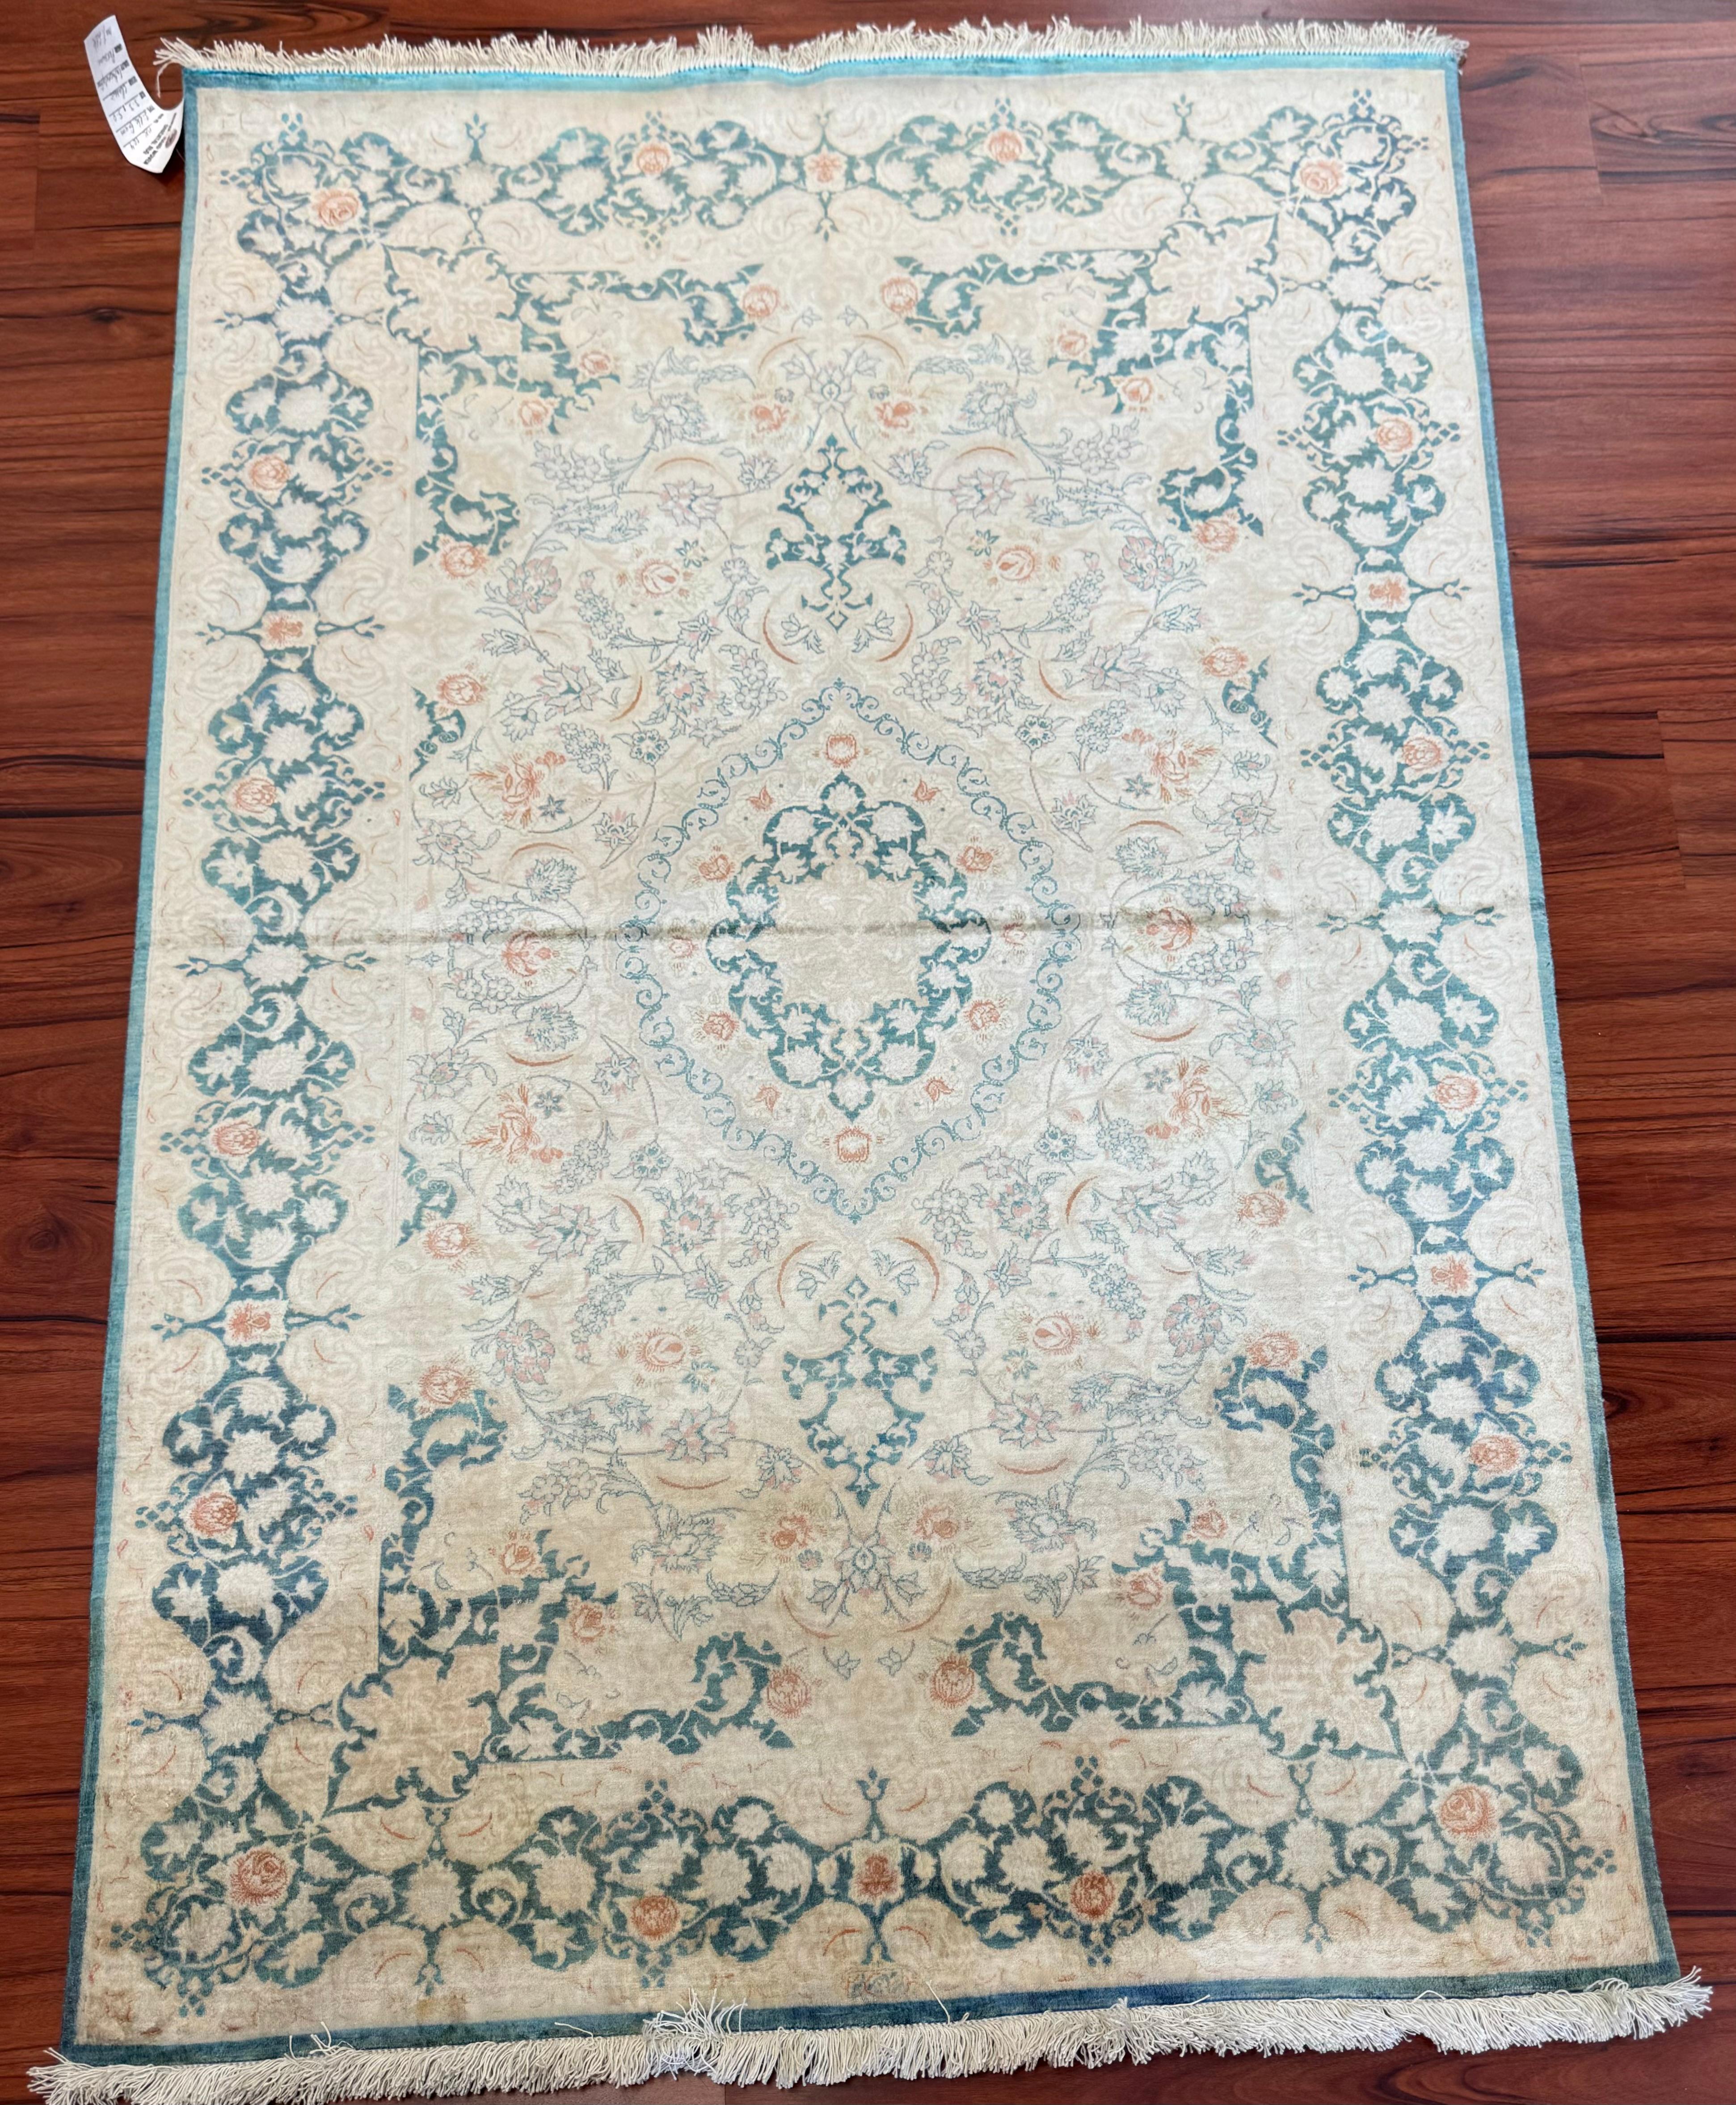 A stunning Extremly Fine Persian Silk Qum Rug that originates from Iran in the mid-20th century. This rug is in excellent condition considering its rich history and has had no repairs. This gorgeous rug has a beautiful design to match its color